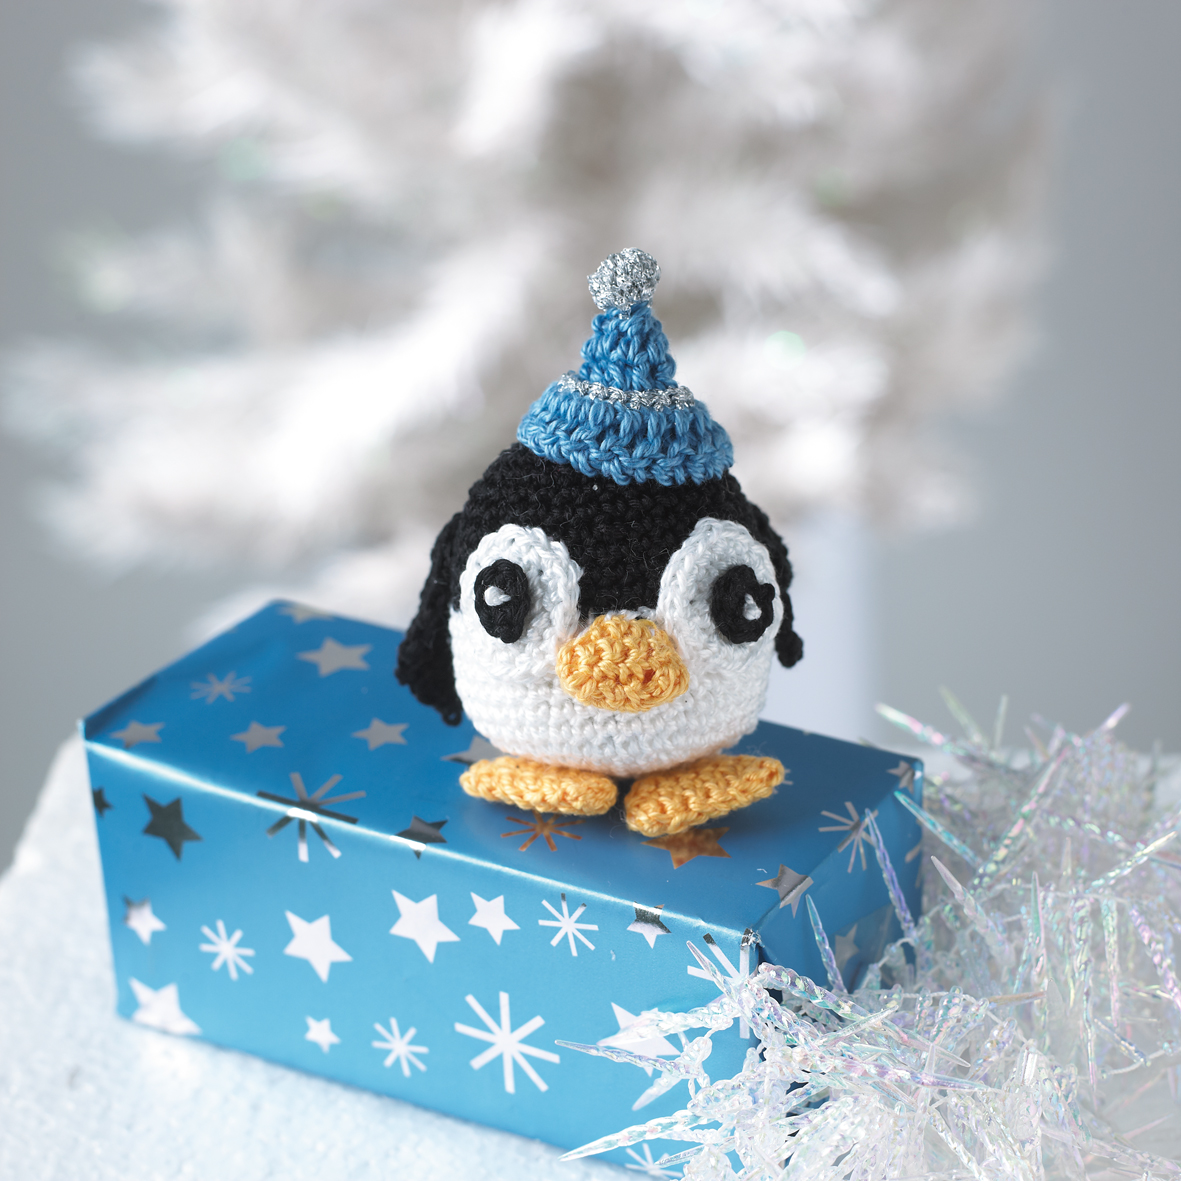 12 Days of Penguin... On the seventh day of Penguin